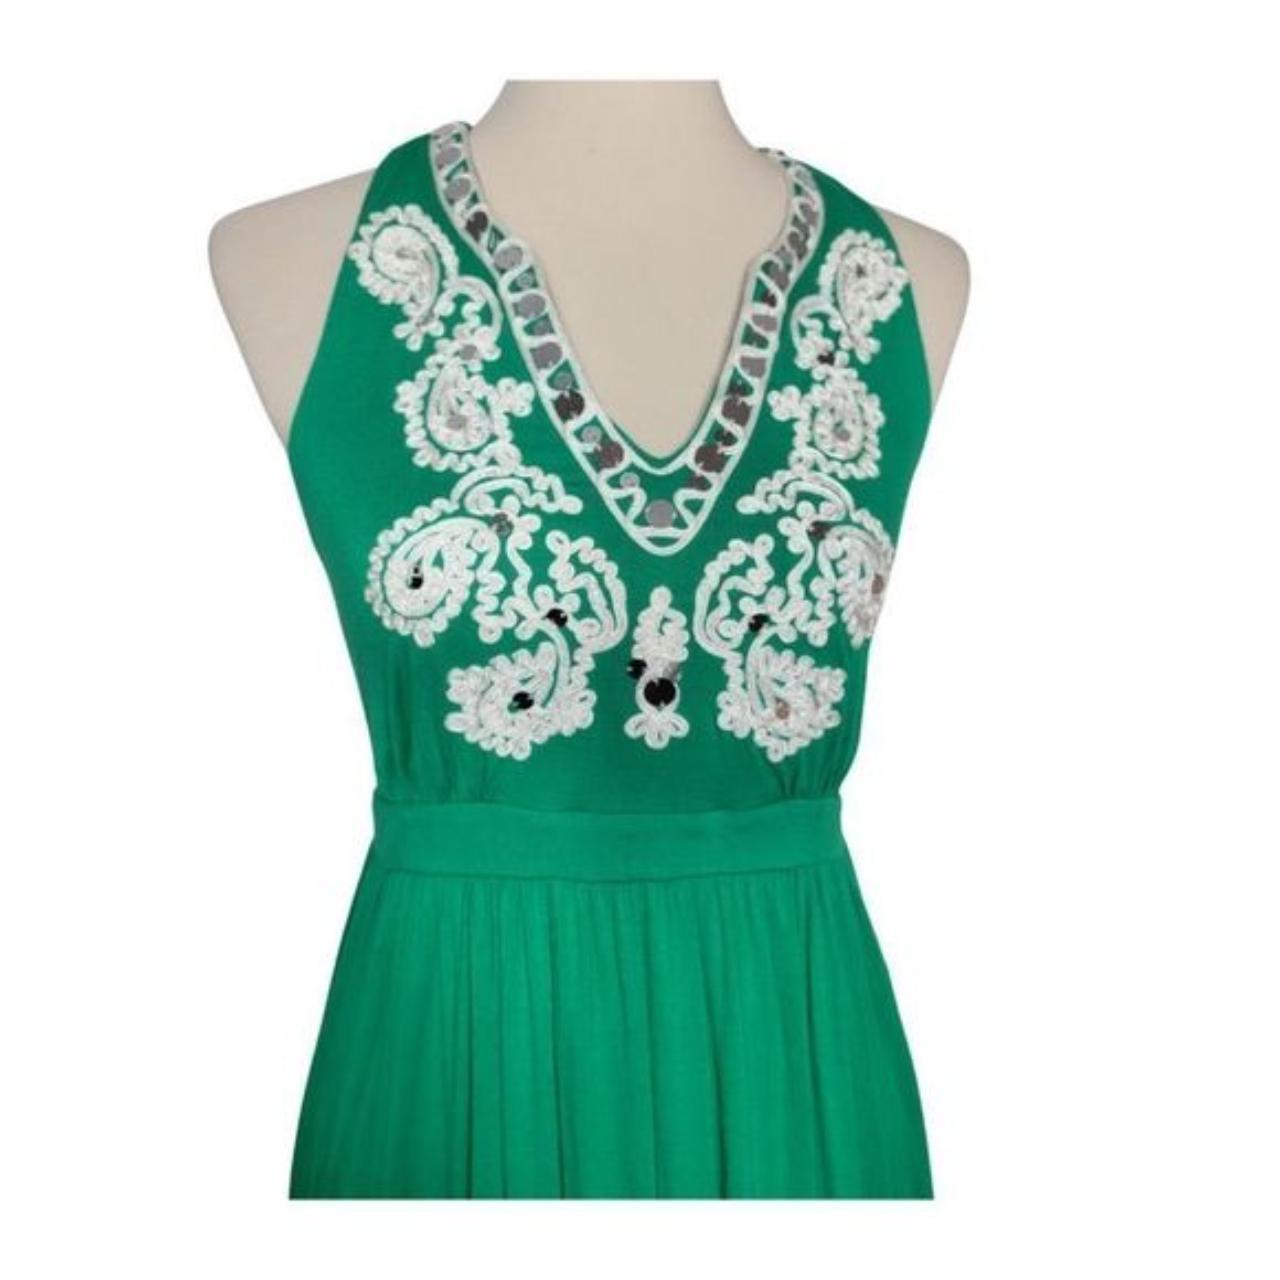 INC International Concepts Women's Green and White Dress (3)